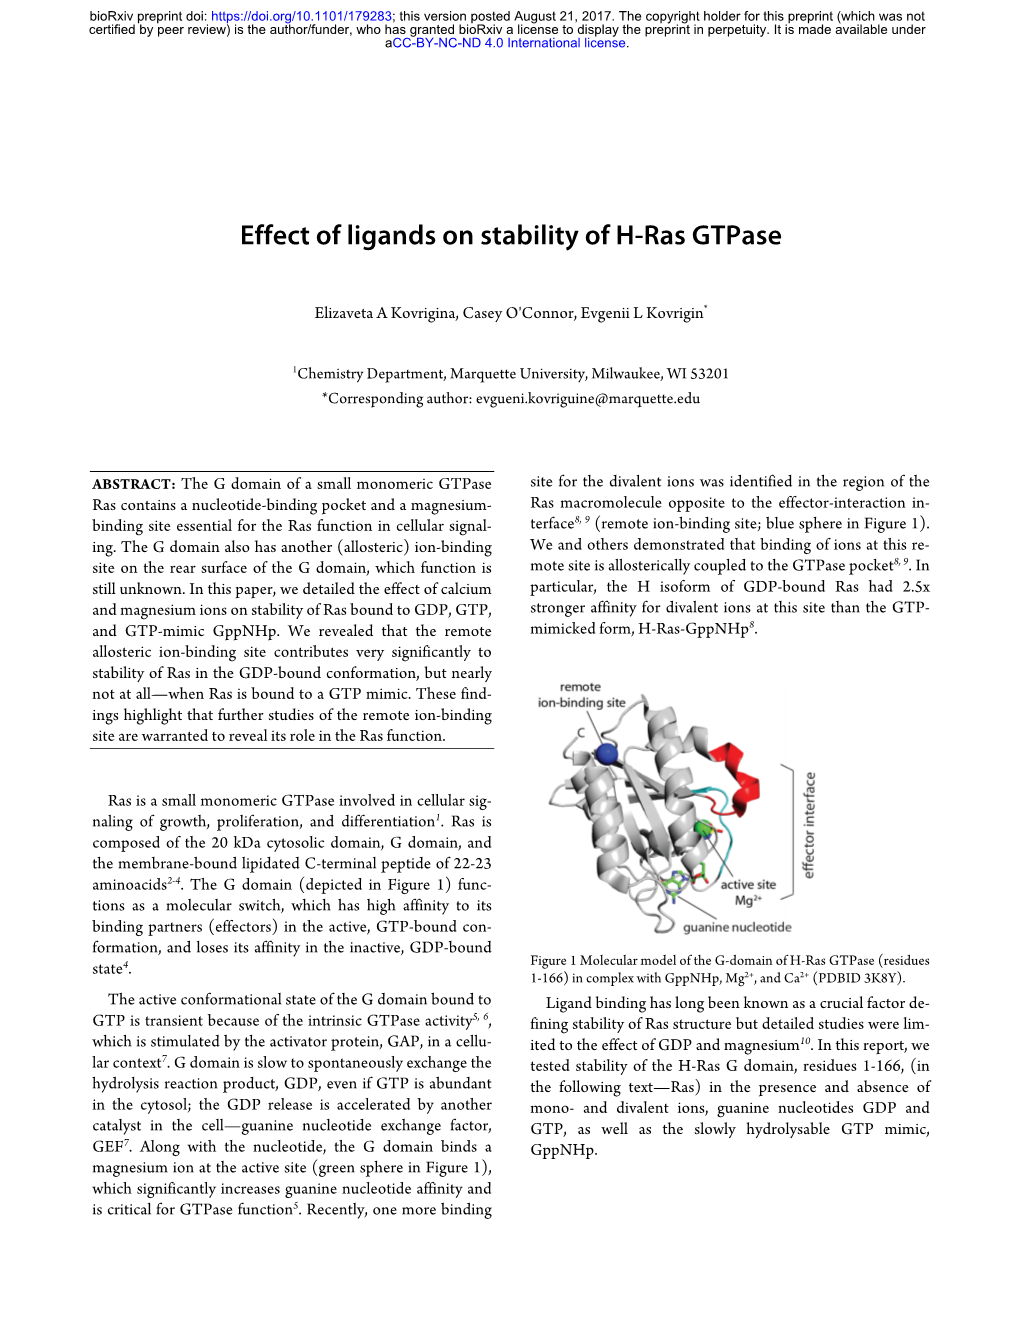 Effect of Ligands on Stability of H-Ras Gtpase